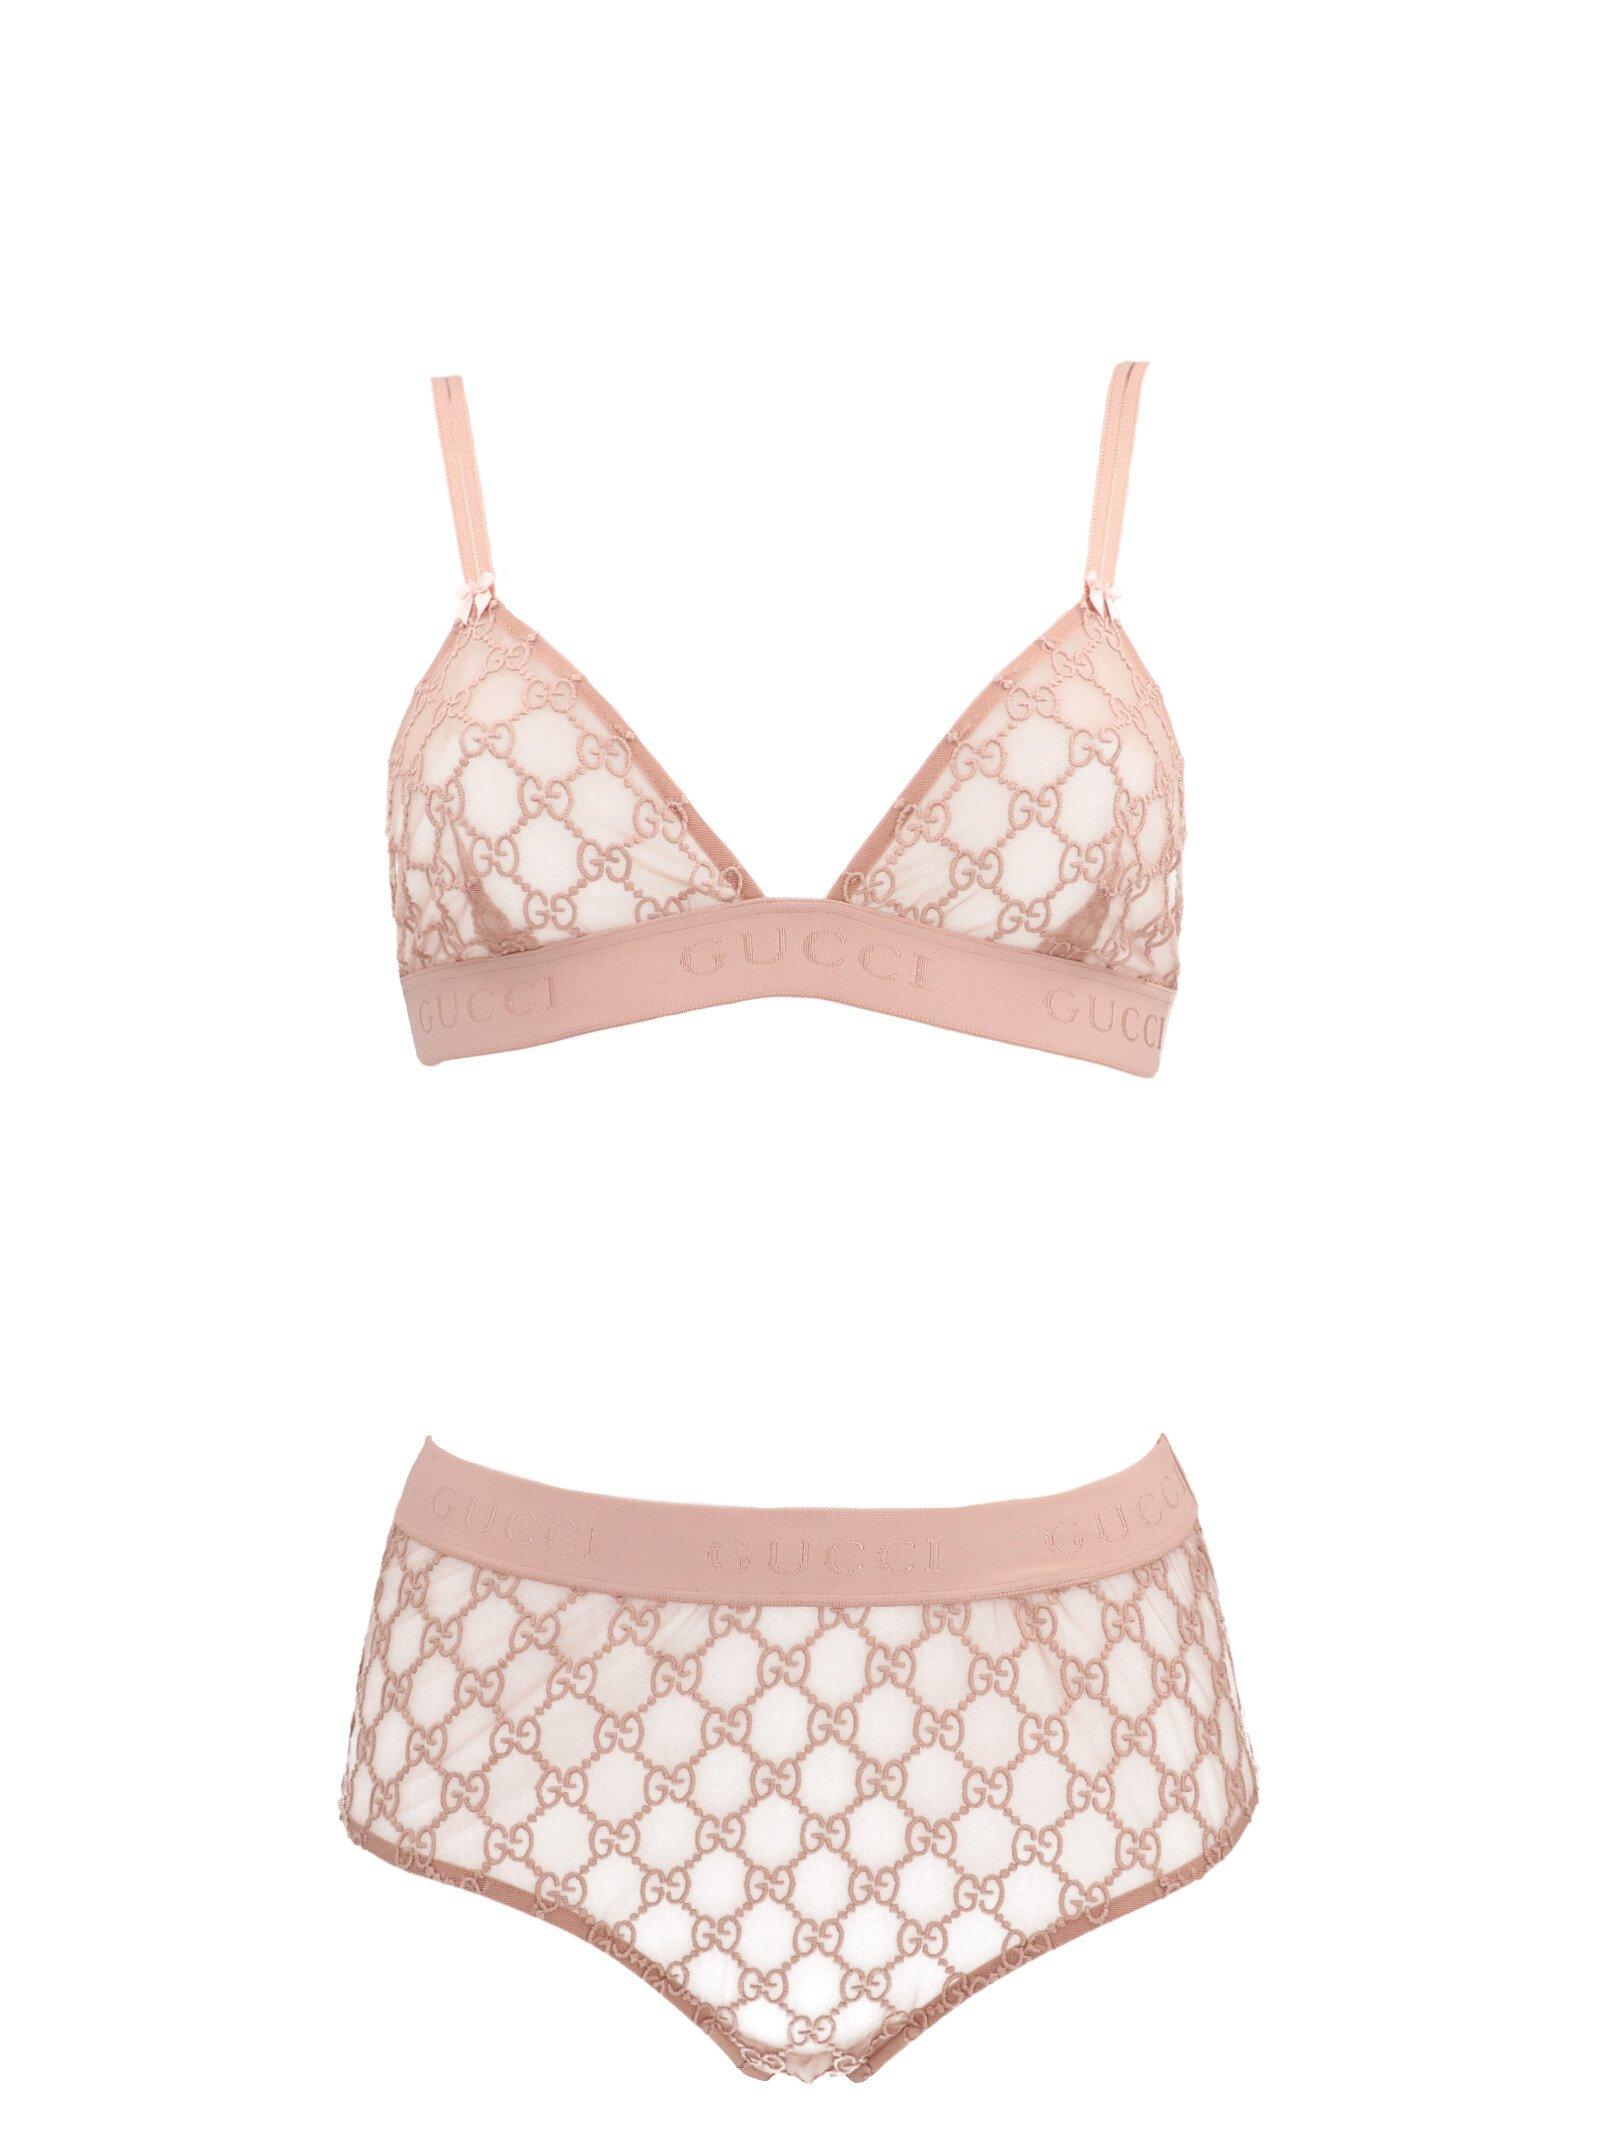 Gucci Gg Tulle Lingerie Set in Pink - Save 30% - Lyst